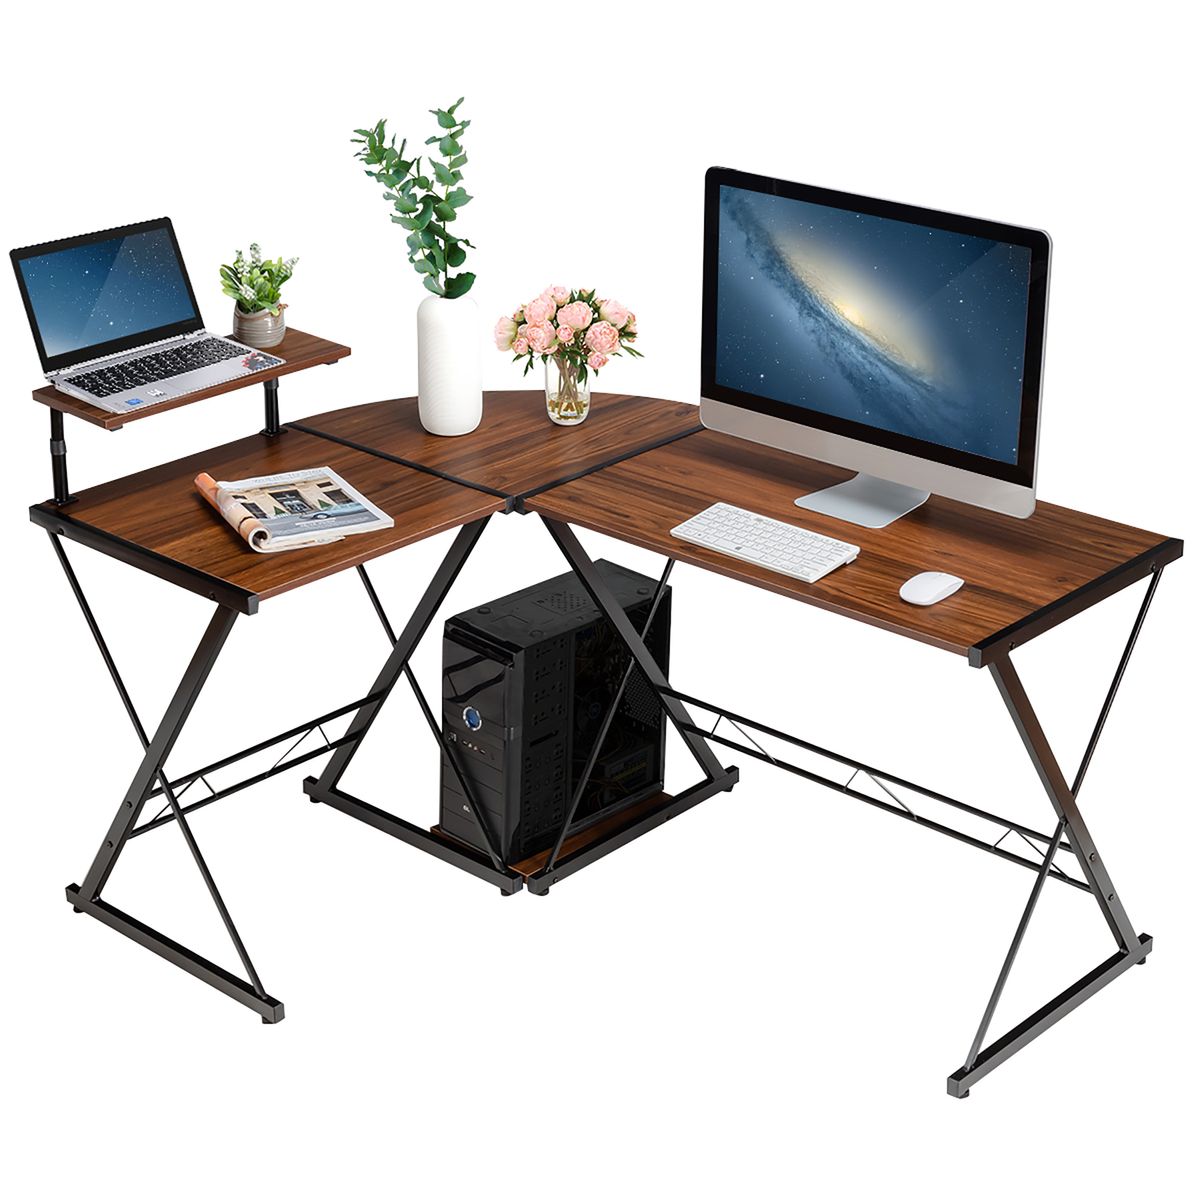 Photos - Office Desk Goplus Costway 58'' x 44'' L-Shaped Gaming Desk with Monitor Stand - Walnu